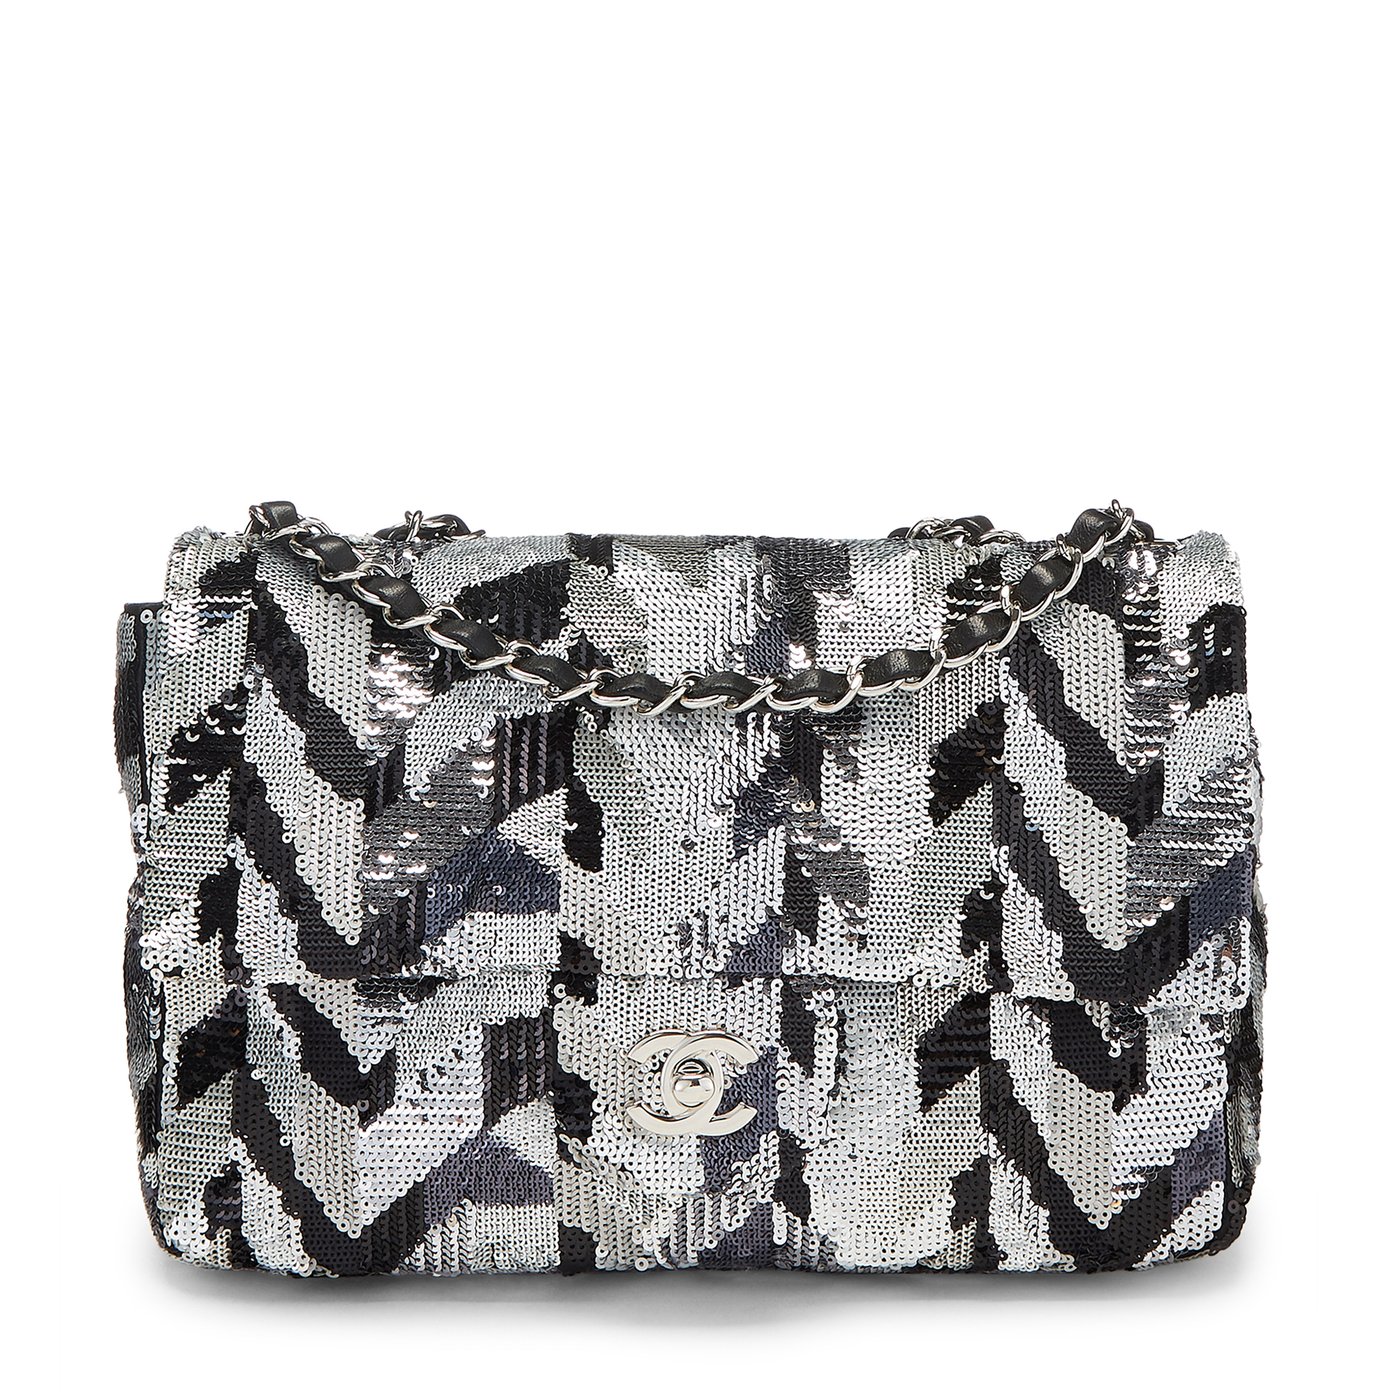 What Goes Around Comes Around Chanel Multi Sequin Half Flap Bag, 10